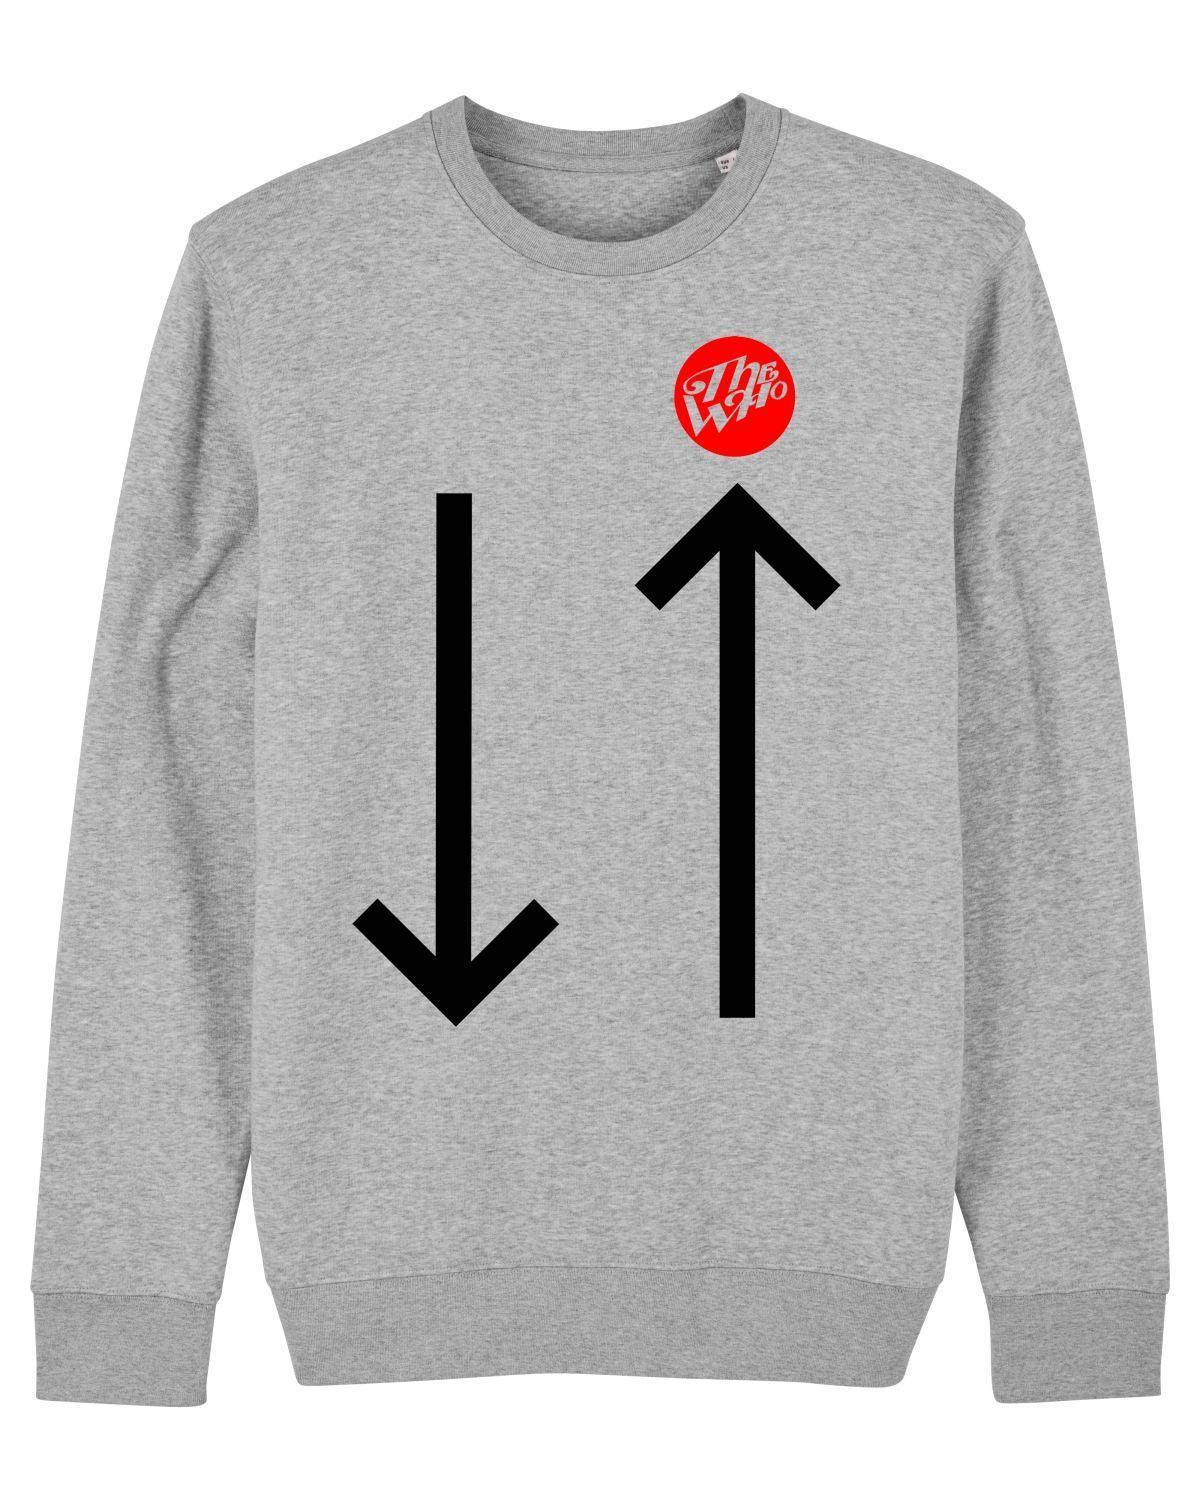 MODERN WORLD: Sweatshirt Inspired by The Jam (3 Colour Options) - SOUND IS COLOUR